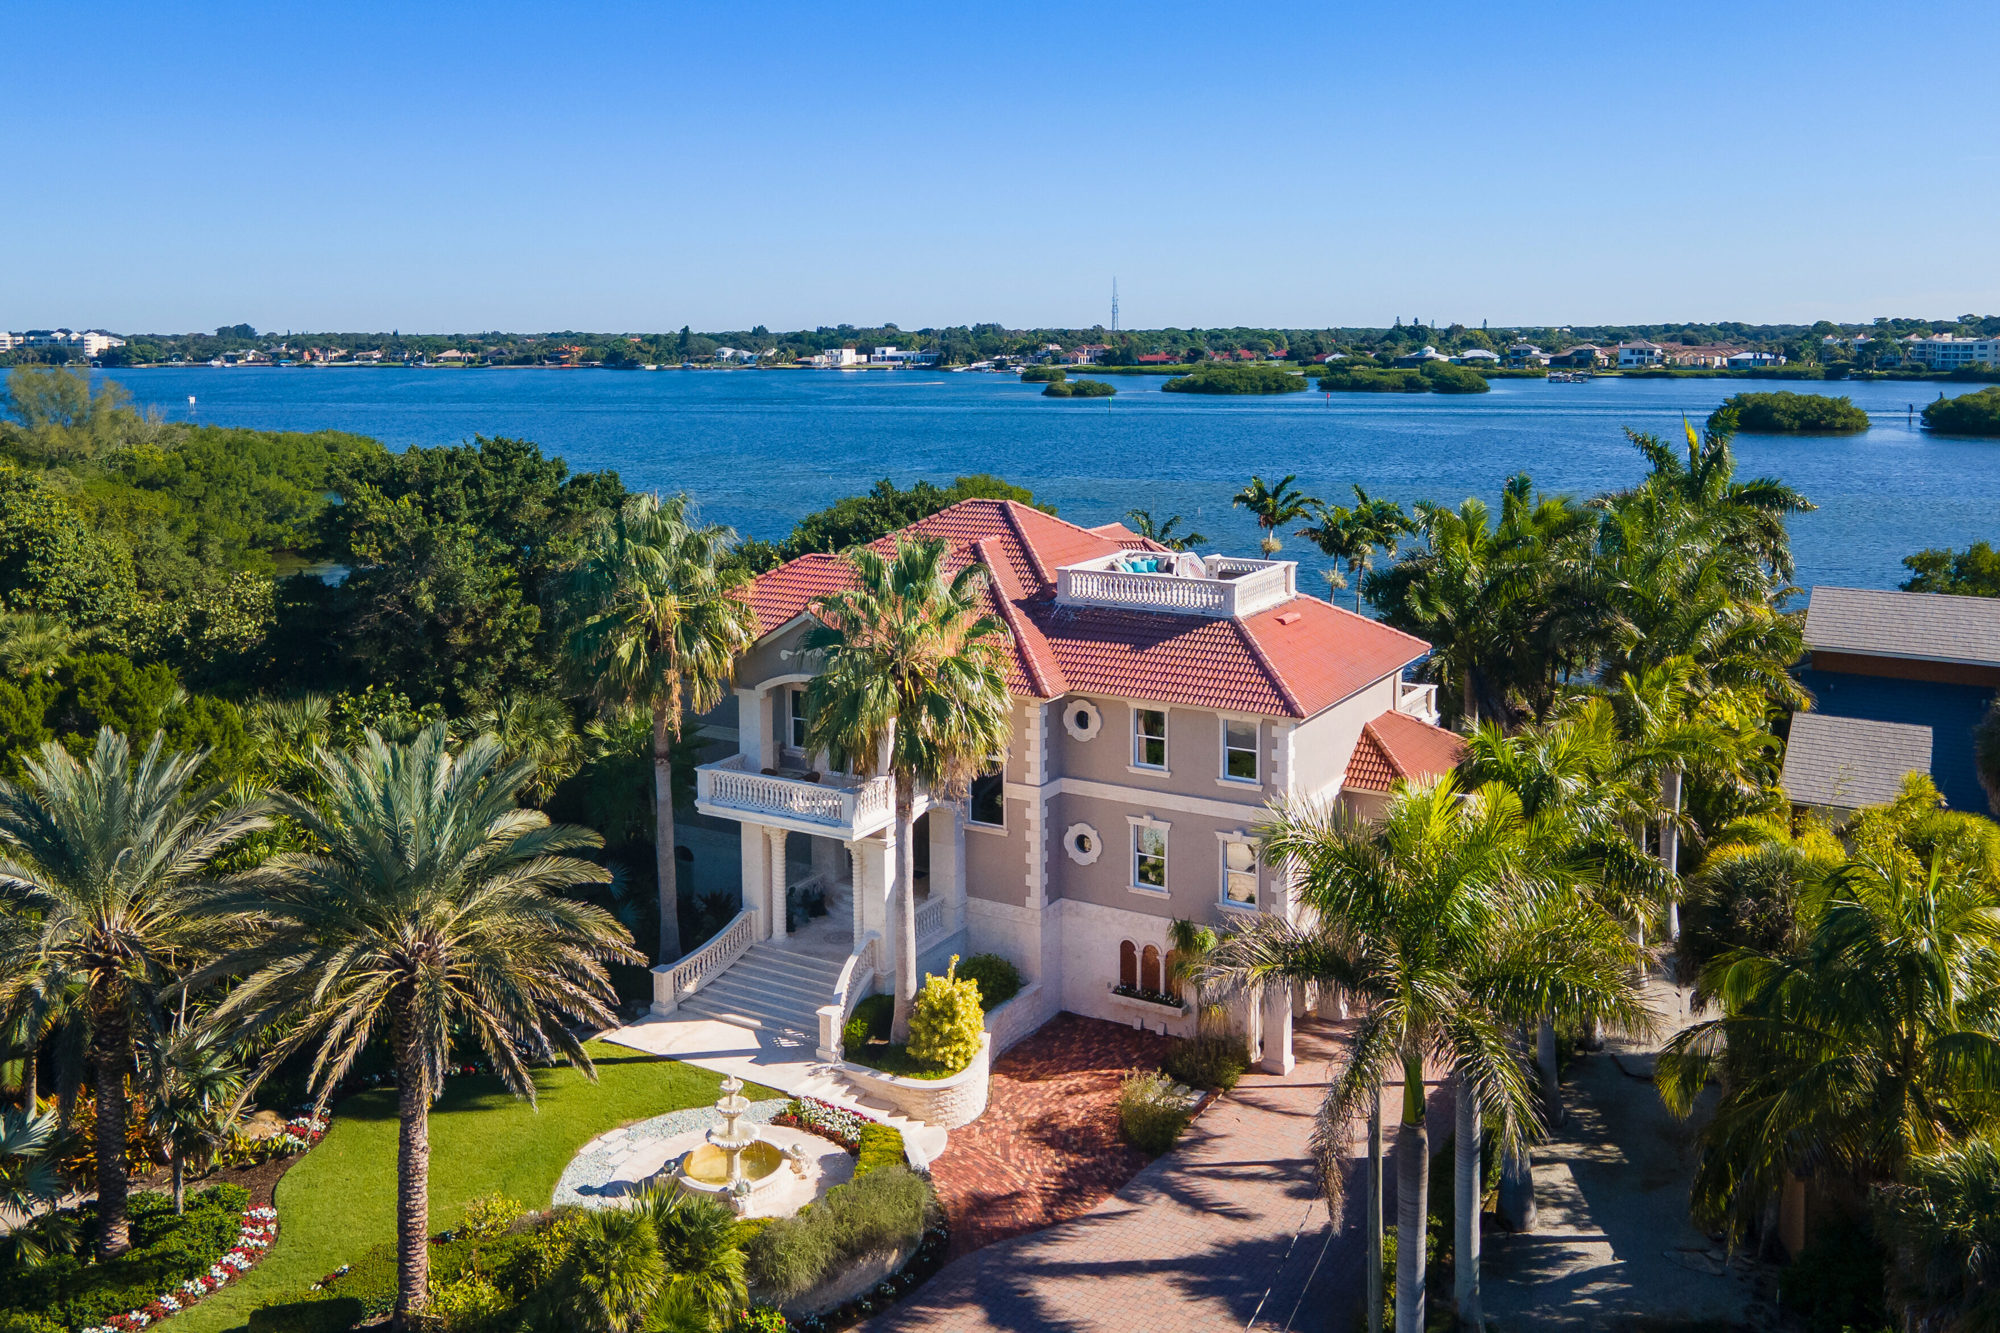 144 North Casey Key Road  was built in 2003 and sold for $6.3 million. (Courtesy Valerie Dell 'Acqua/Premier Southeby's International Realty)